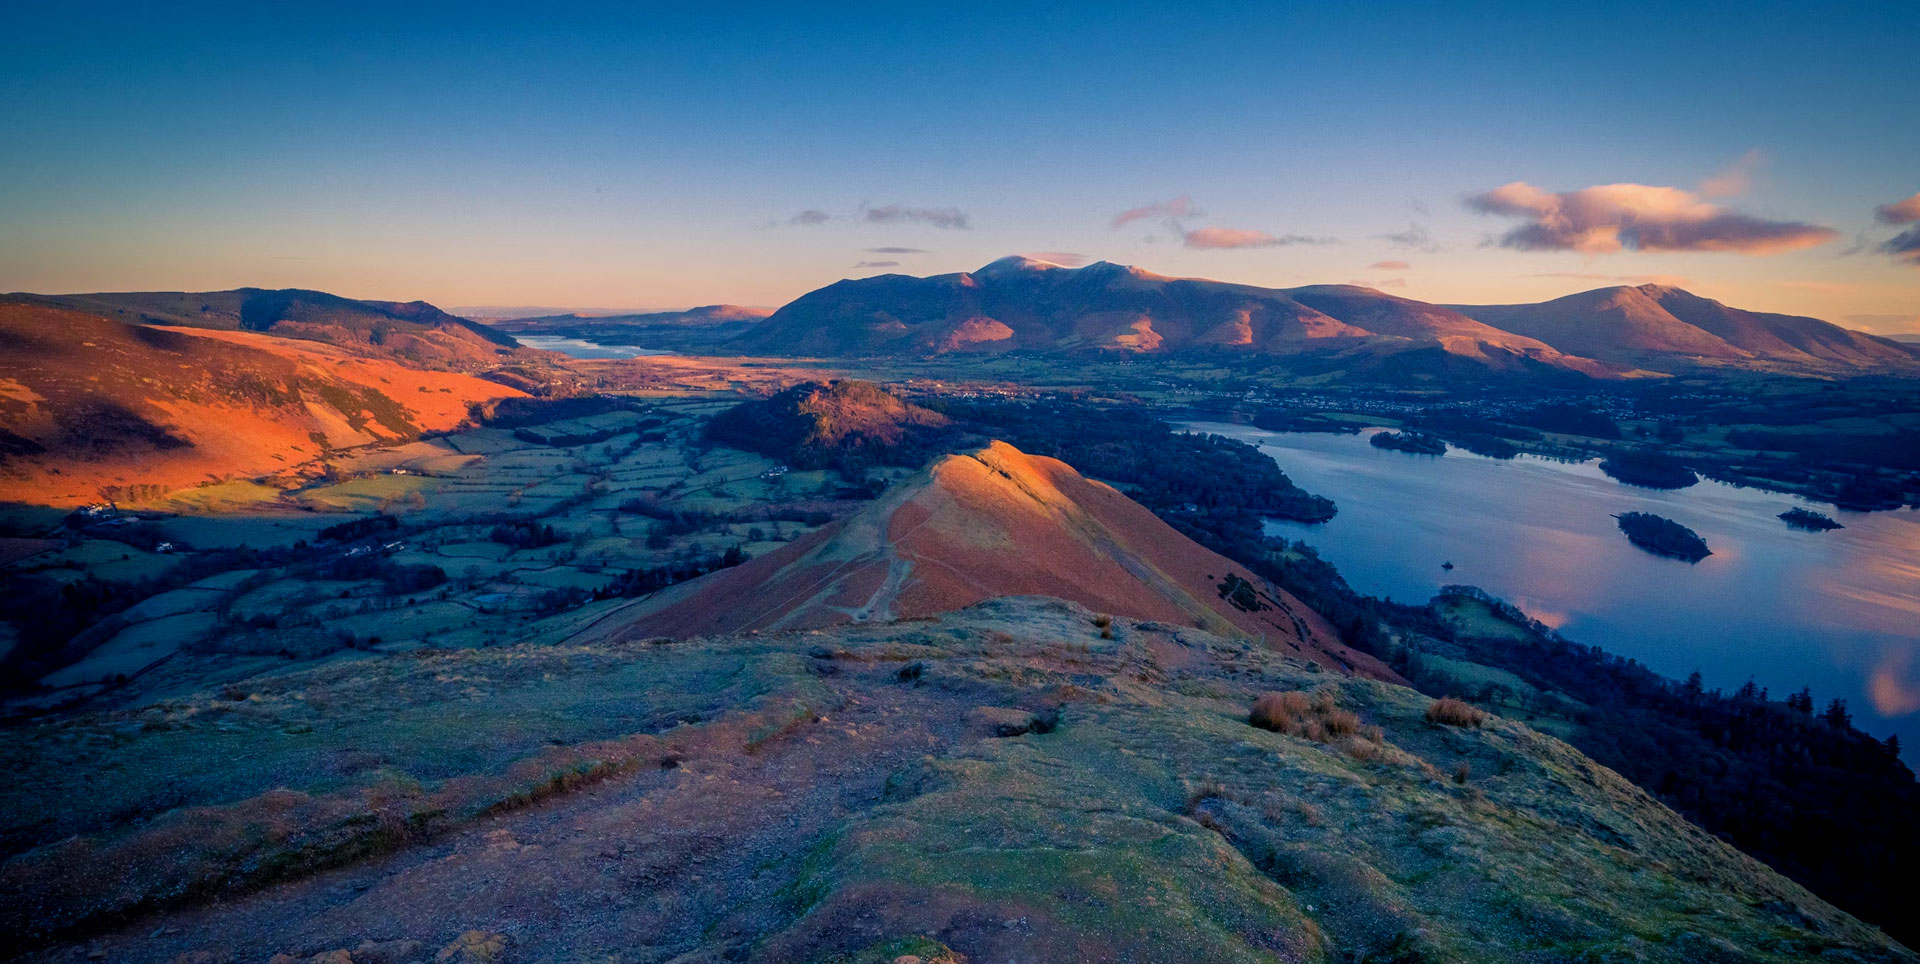 The view from the top of Catbells, Keswick, UK